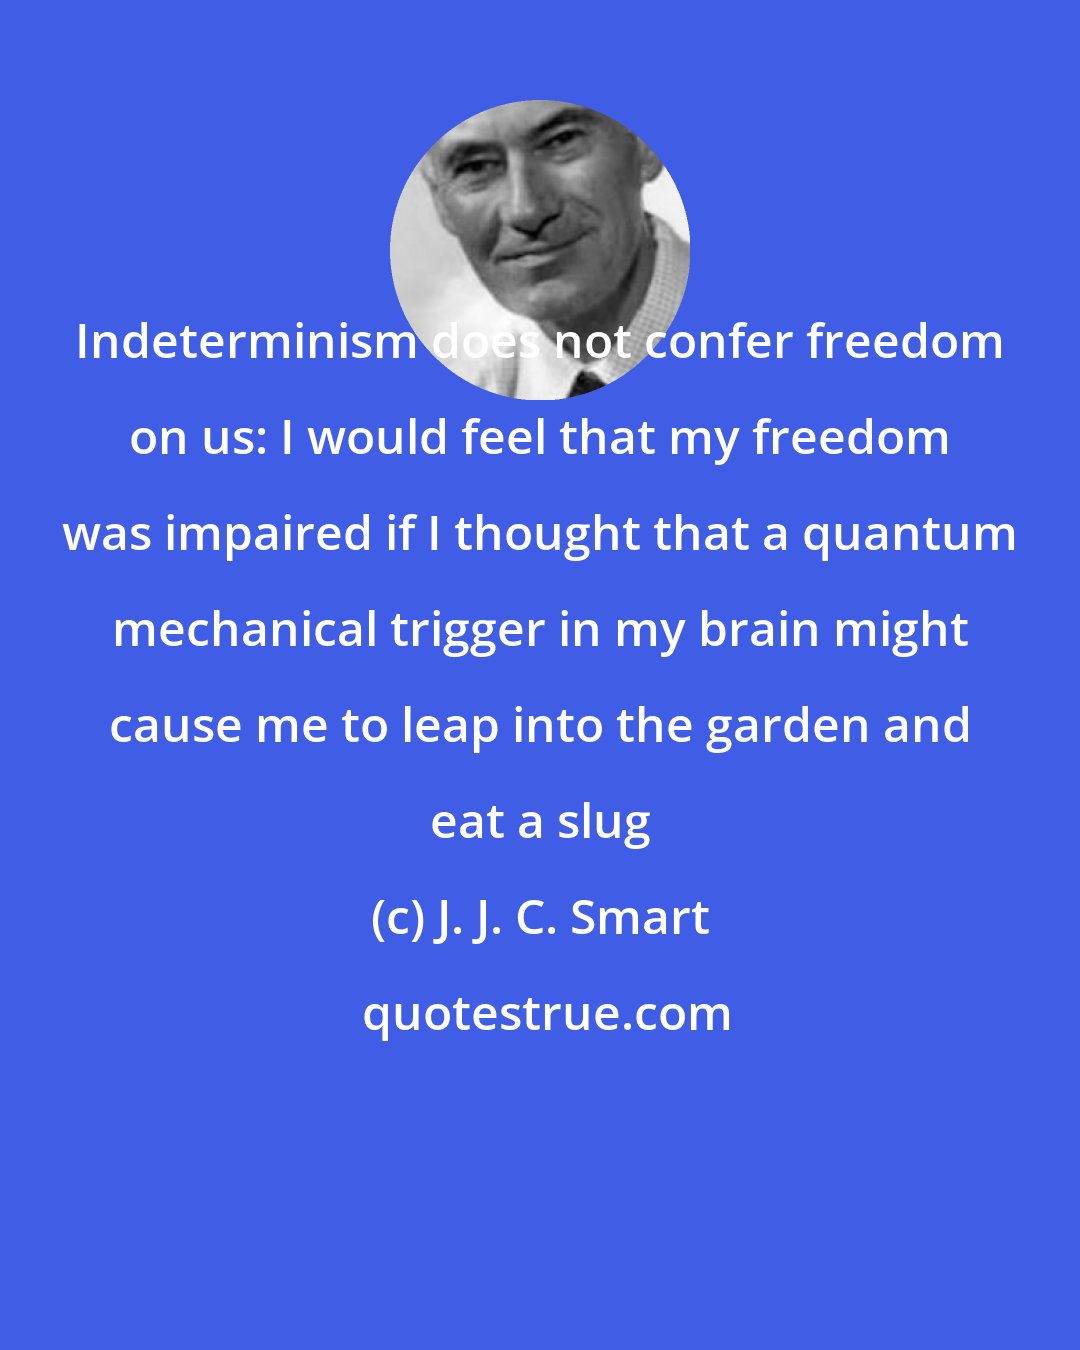 J. J. C. Smart: Indeterminism does not confer freedom on us: I would feel that my freedom was impaired if I thought that a quantum mechanical trigger in my brain might cause me to leap into the garden and eat a slug